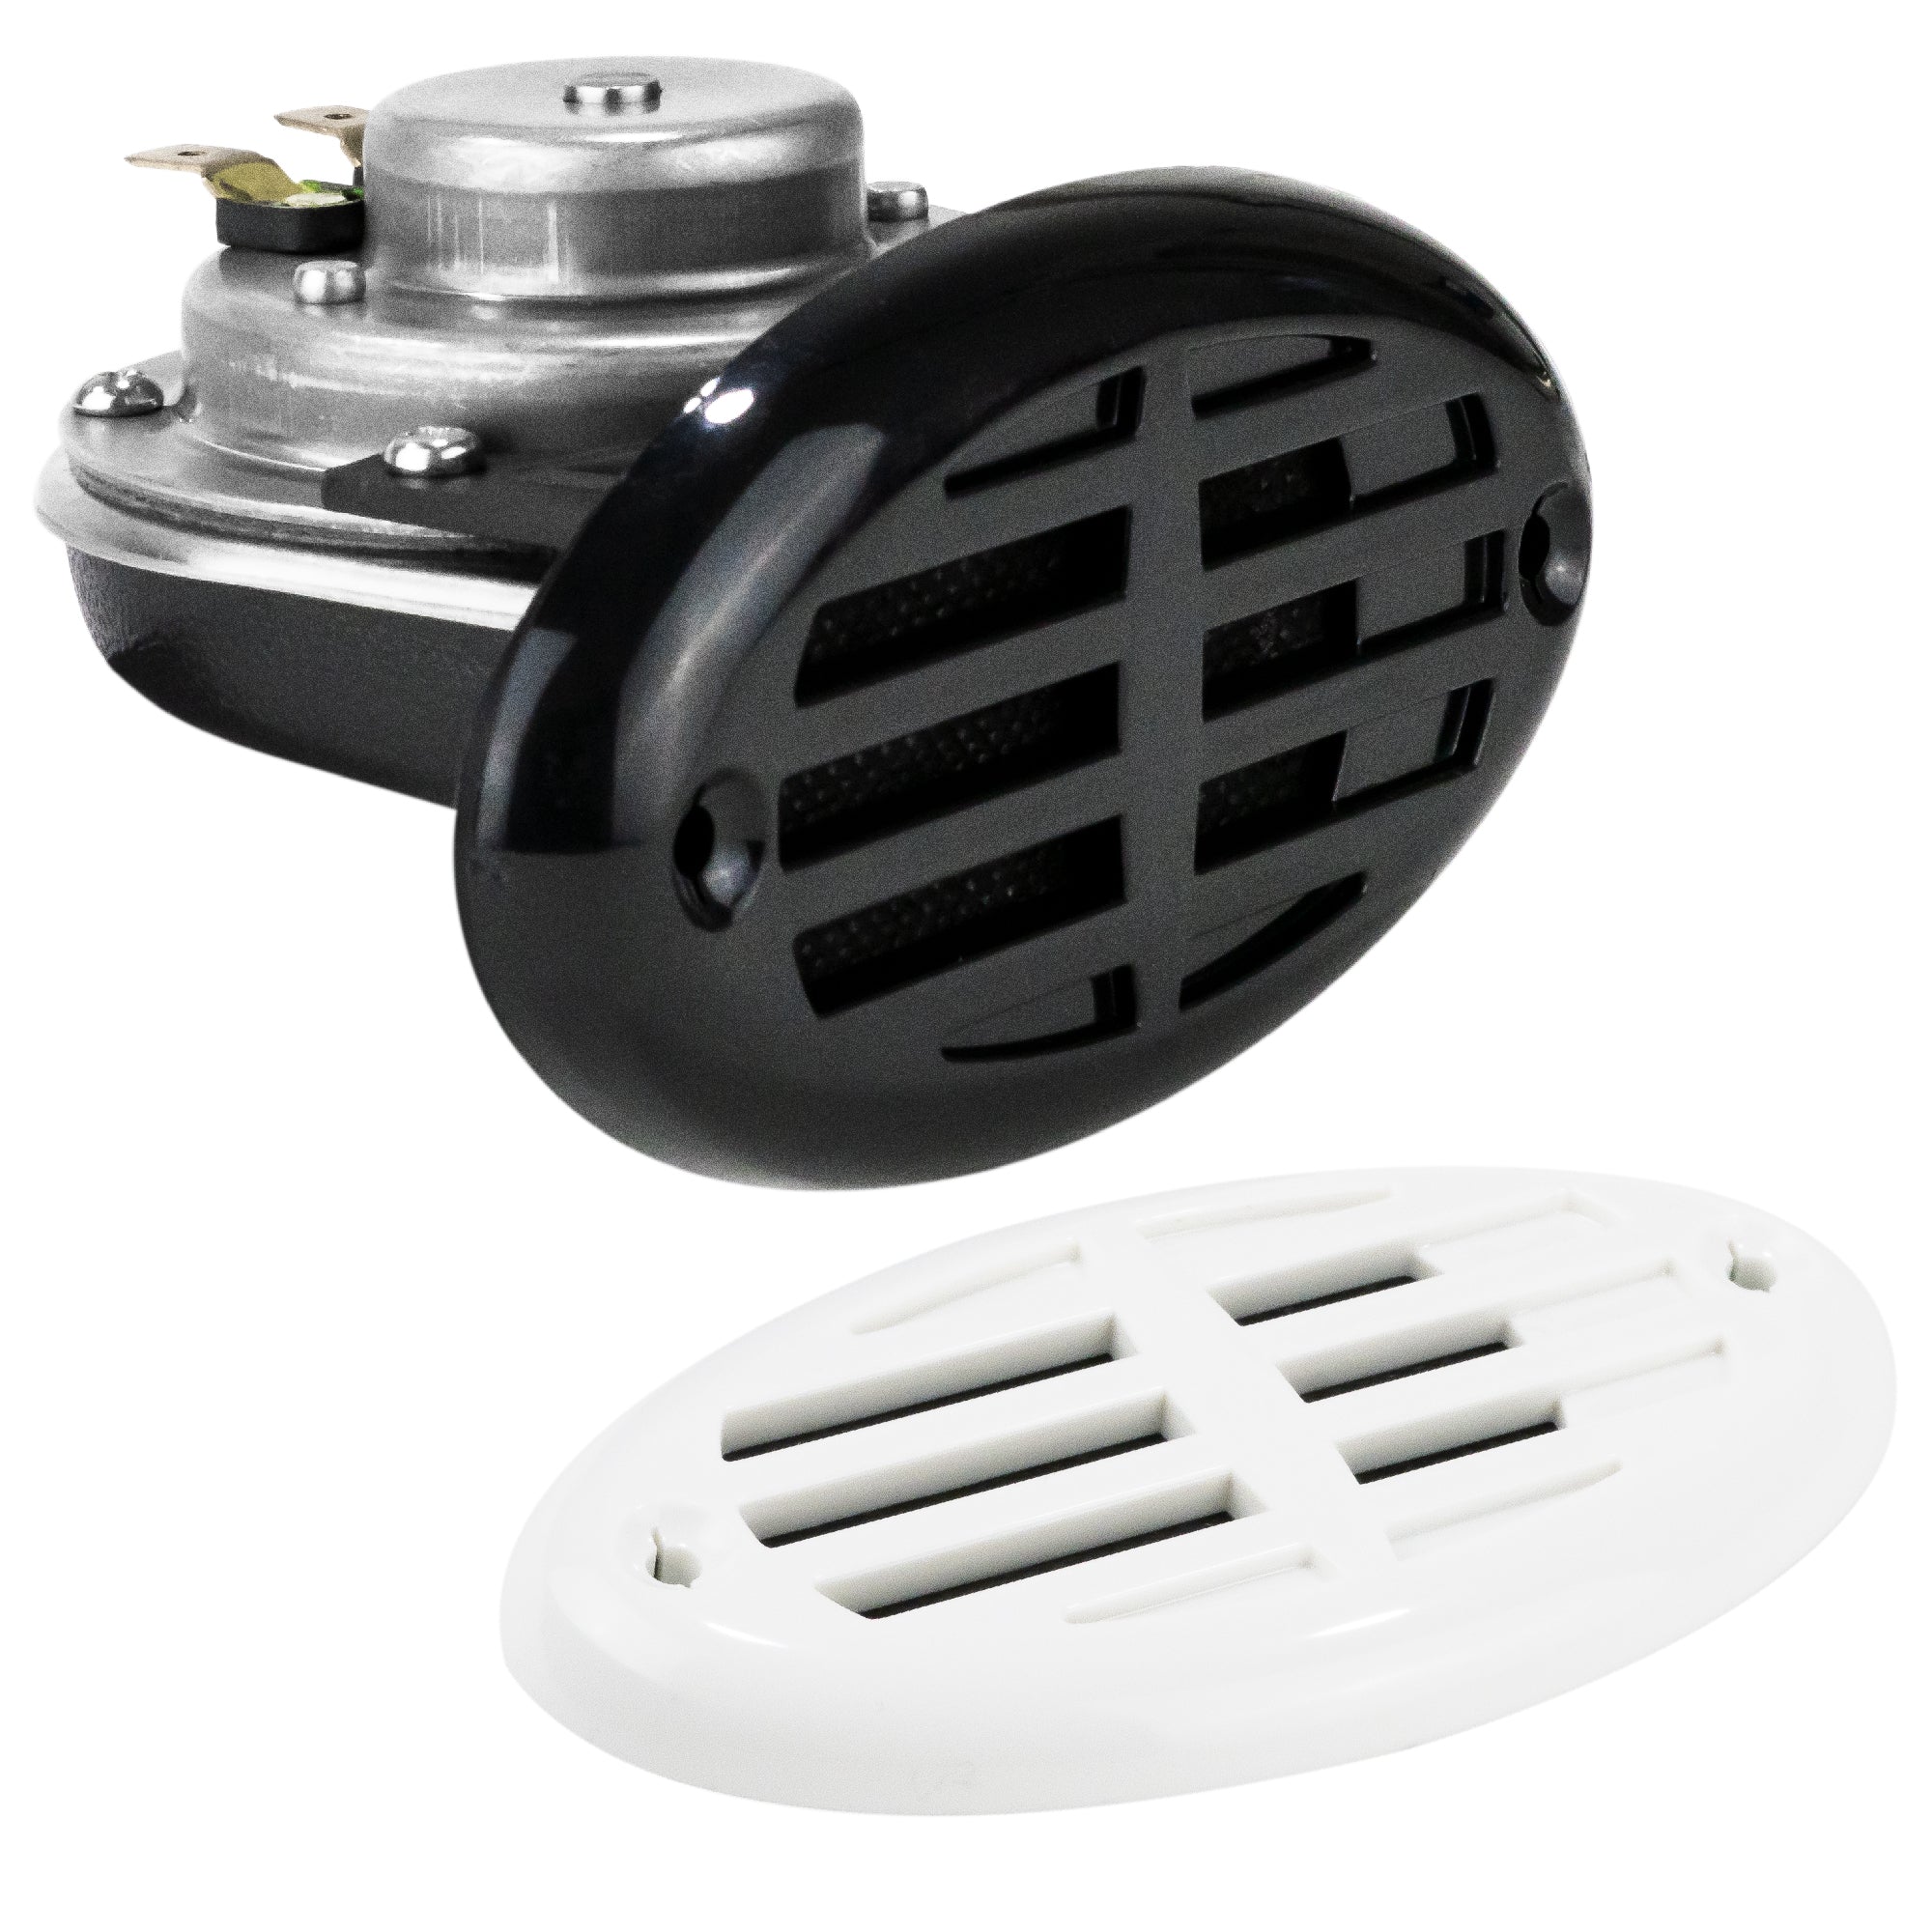 Drop-in Hidden Boat Horn with Black and White Grills, 12V - 110+5 dB -  FO3914